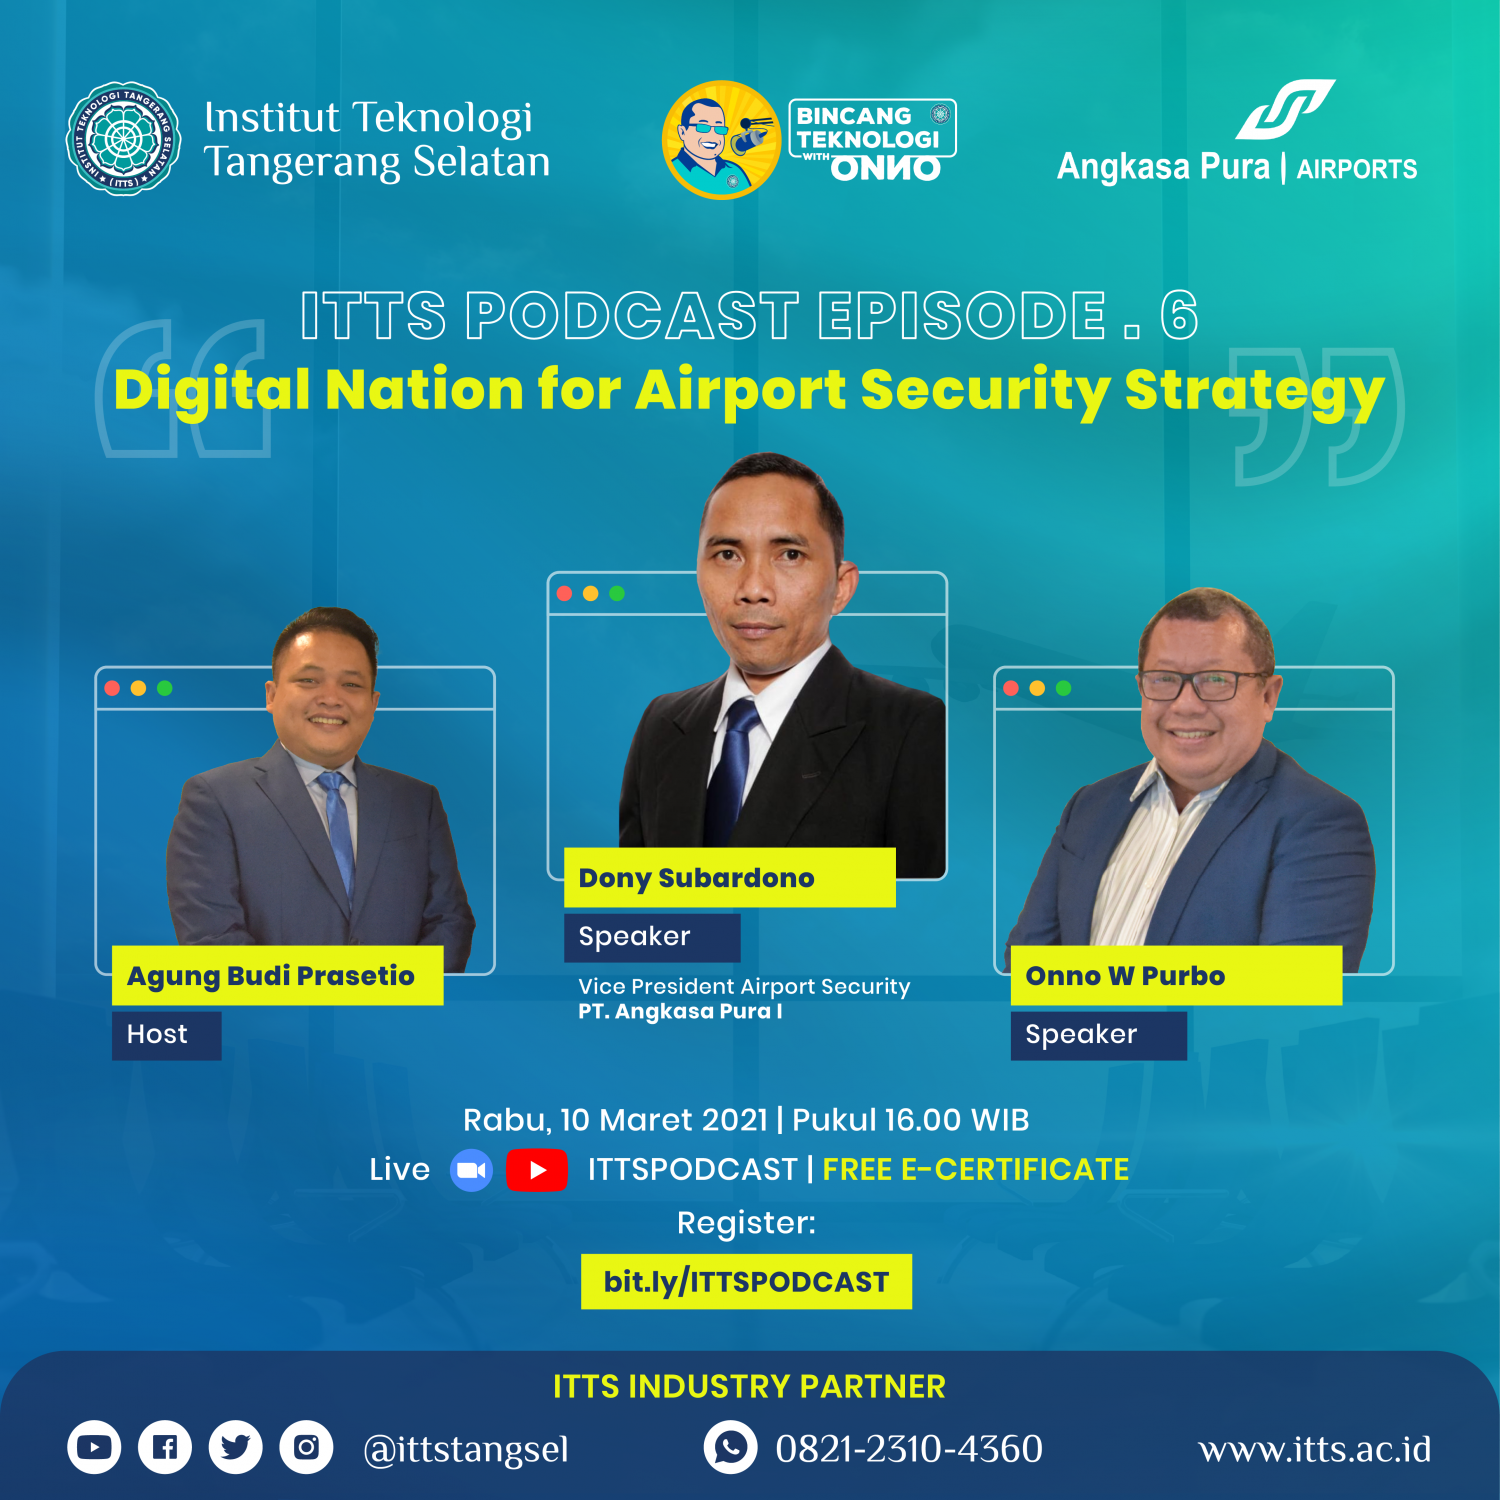 ITTSPODCAST Episode 6 - Digital Nation for Airport Security Strategy